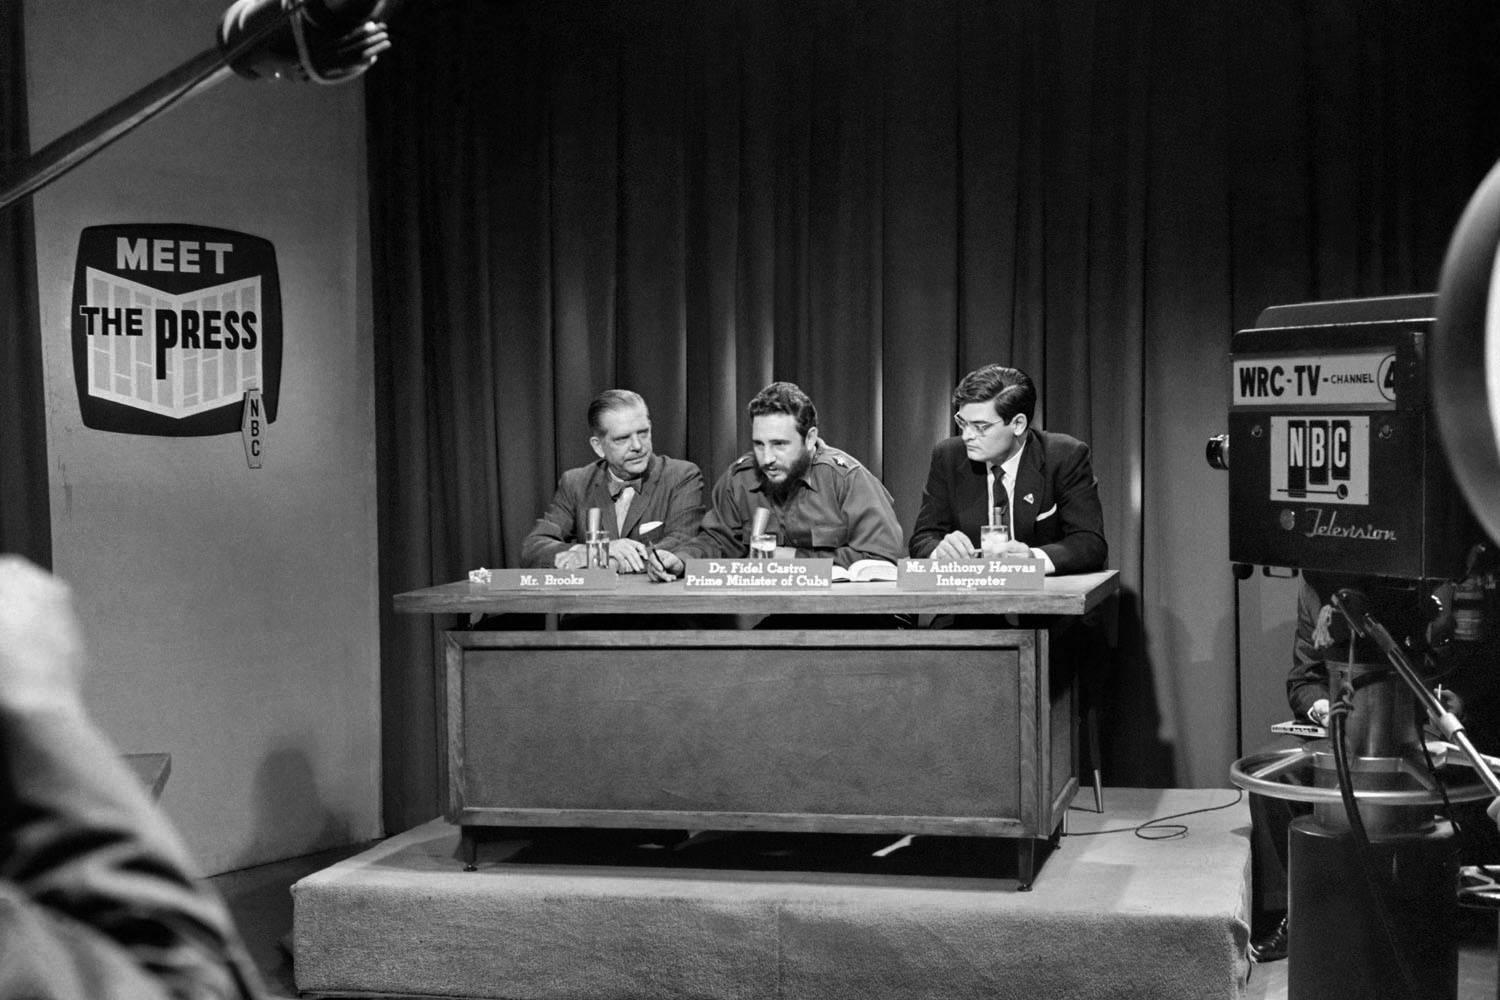 Fidel Castro  answering questions from journalists on Meet the Press, Washington